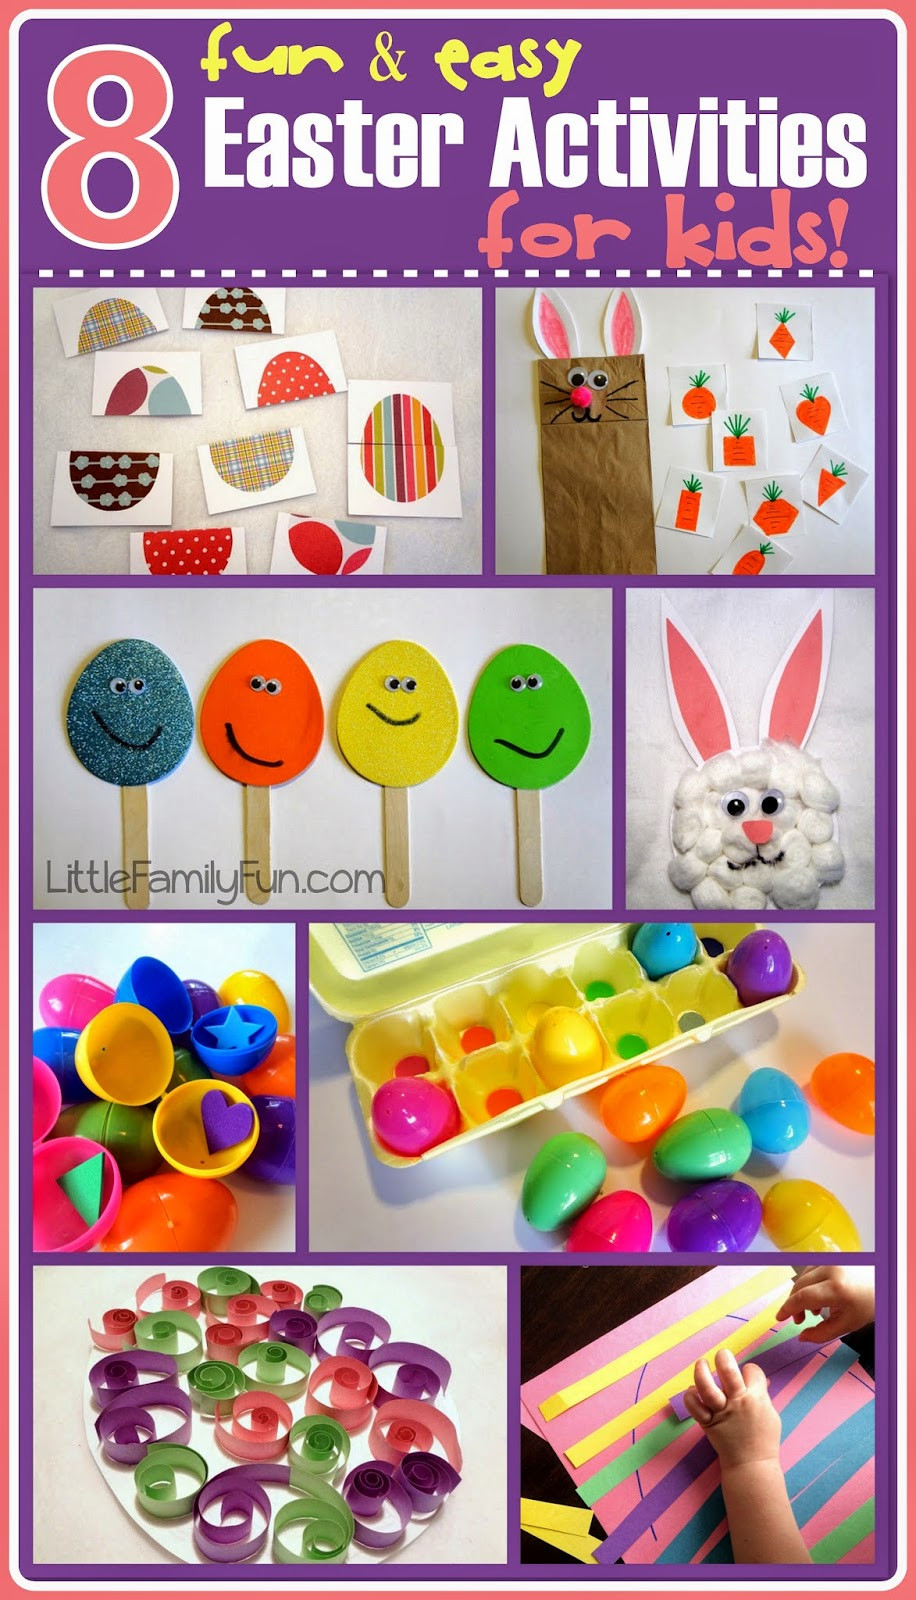 Fun Easter Ideas
 Little Family Fun 8 fun & easy Easter Activities for Kids